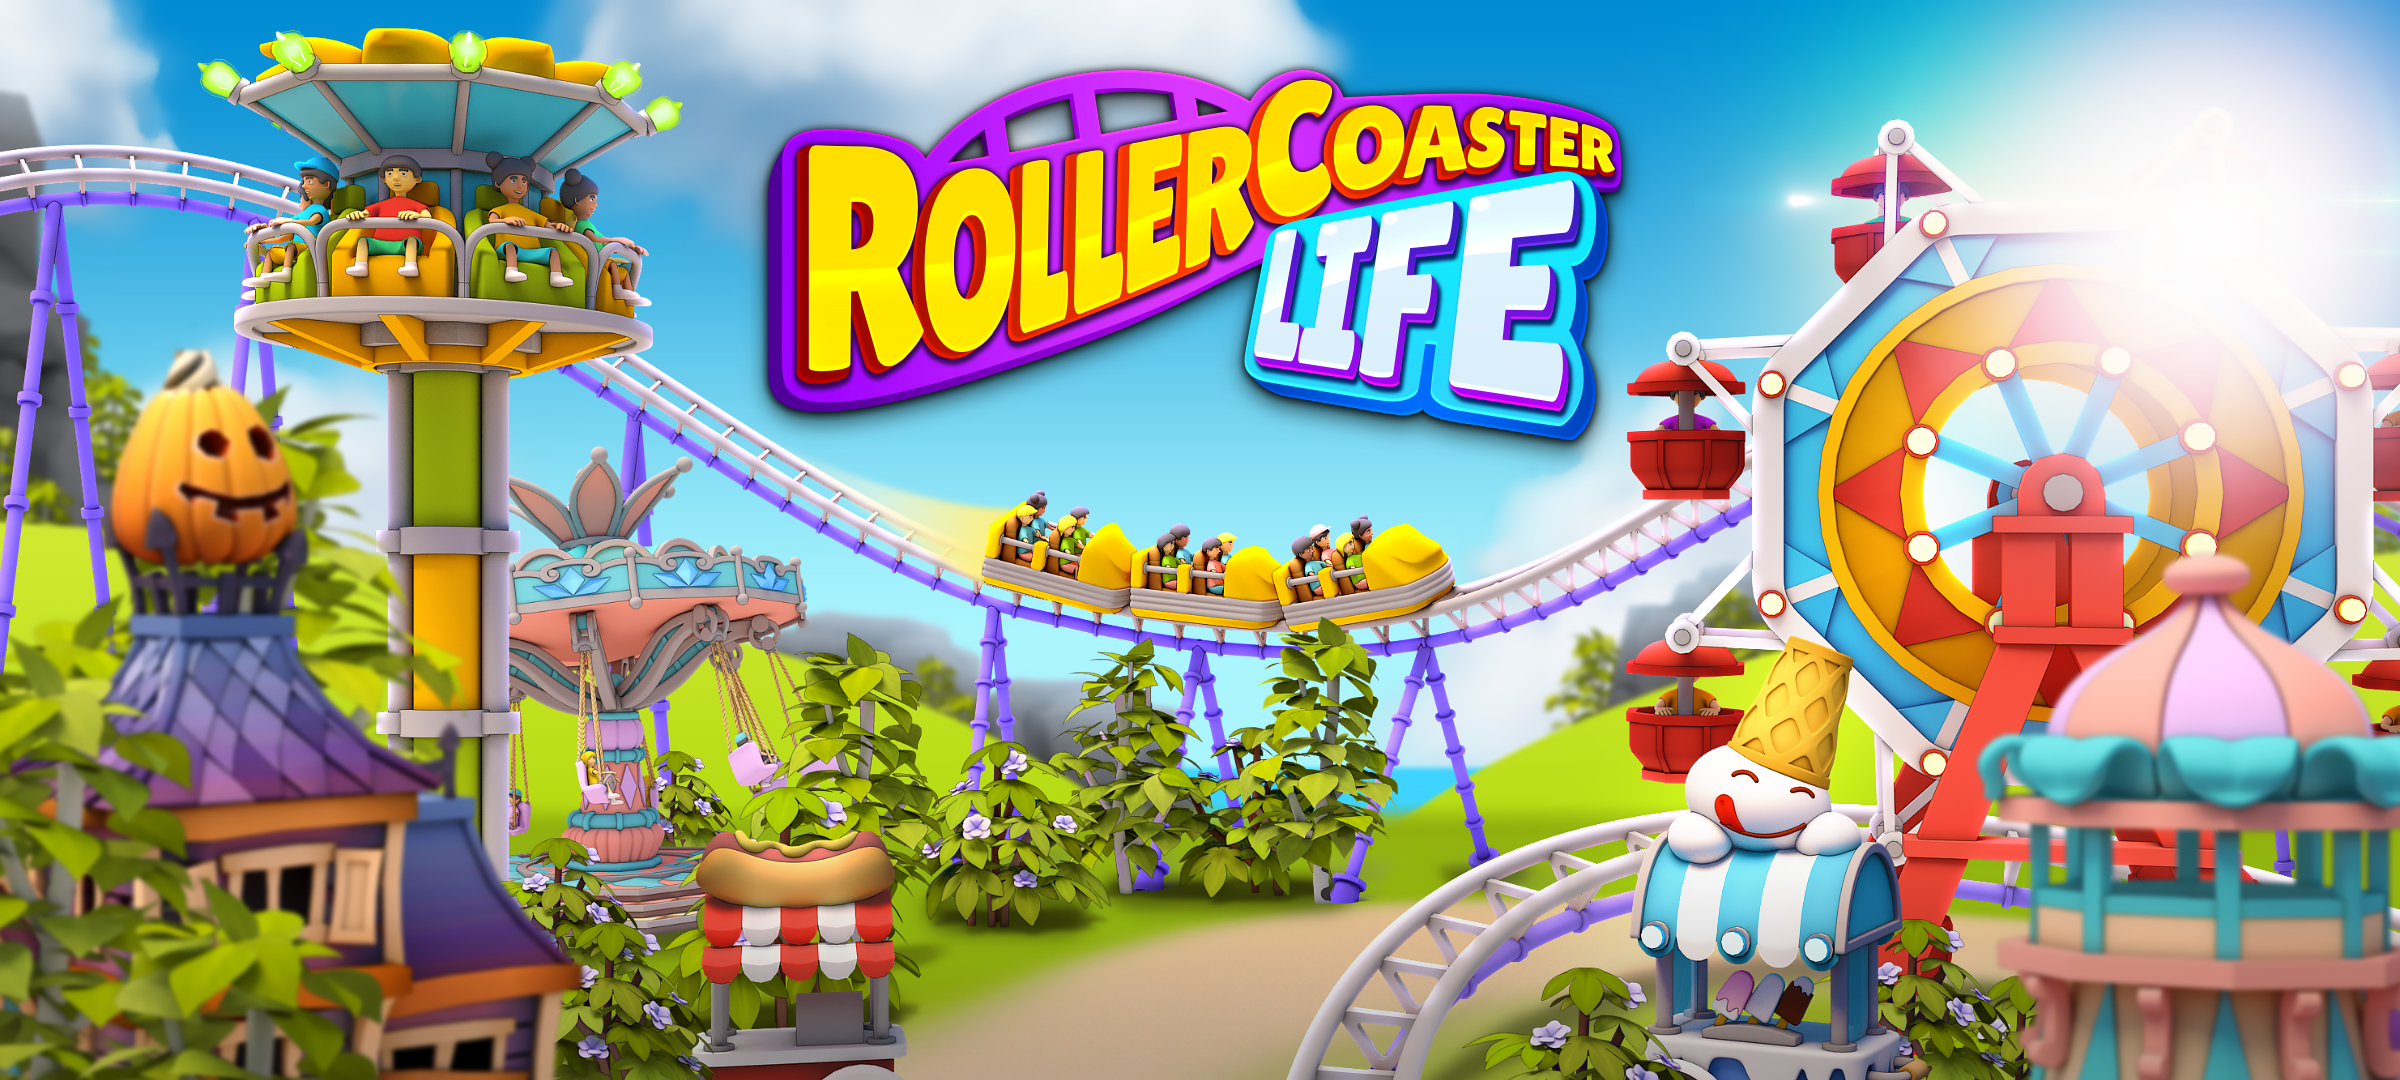 Roller Coaster Life – Build Your Own Theme Park